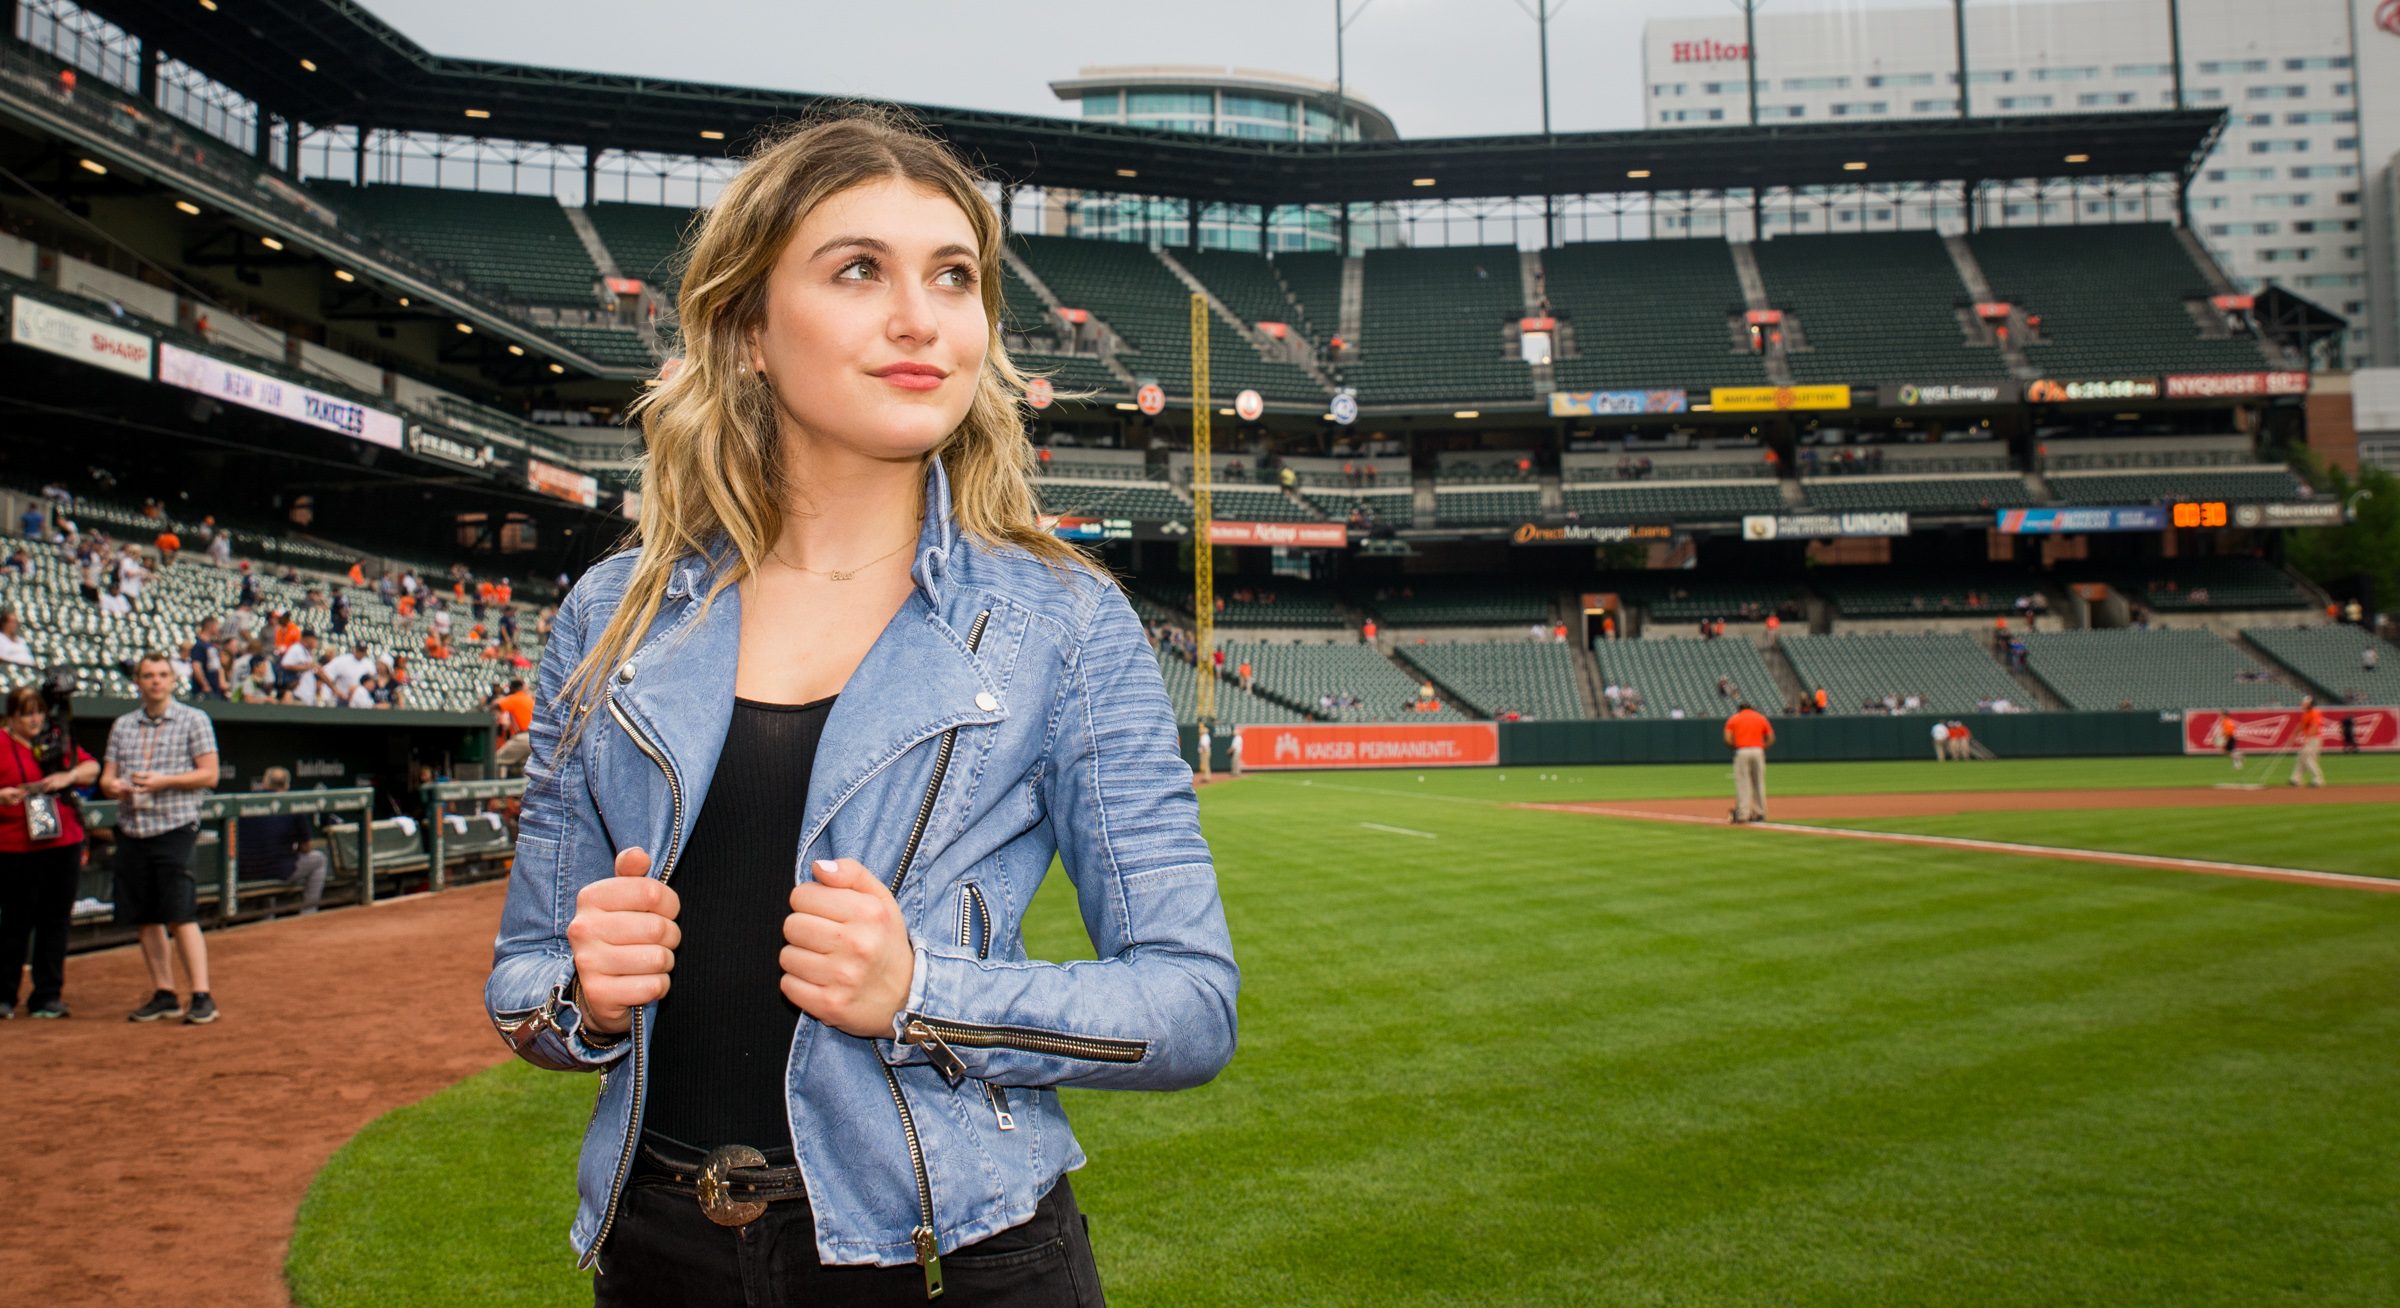 Baltimore, Md - Singer, songwriter and actor Elle Winter is scheduled to perform at “Friday Fireworks and Music at America’s Ballparks” at Oriole Park on June 1st. (Mike Jordan/BPE Staff Photographer)